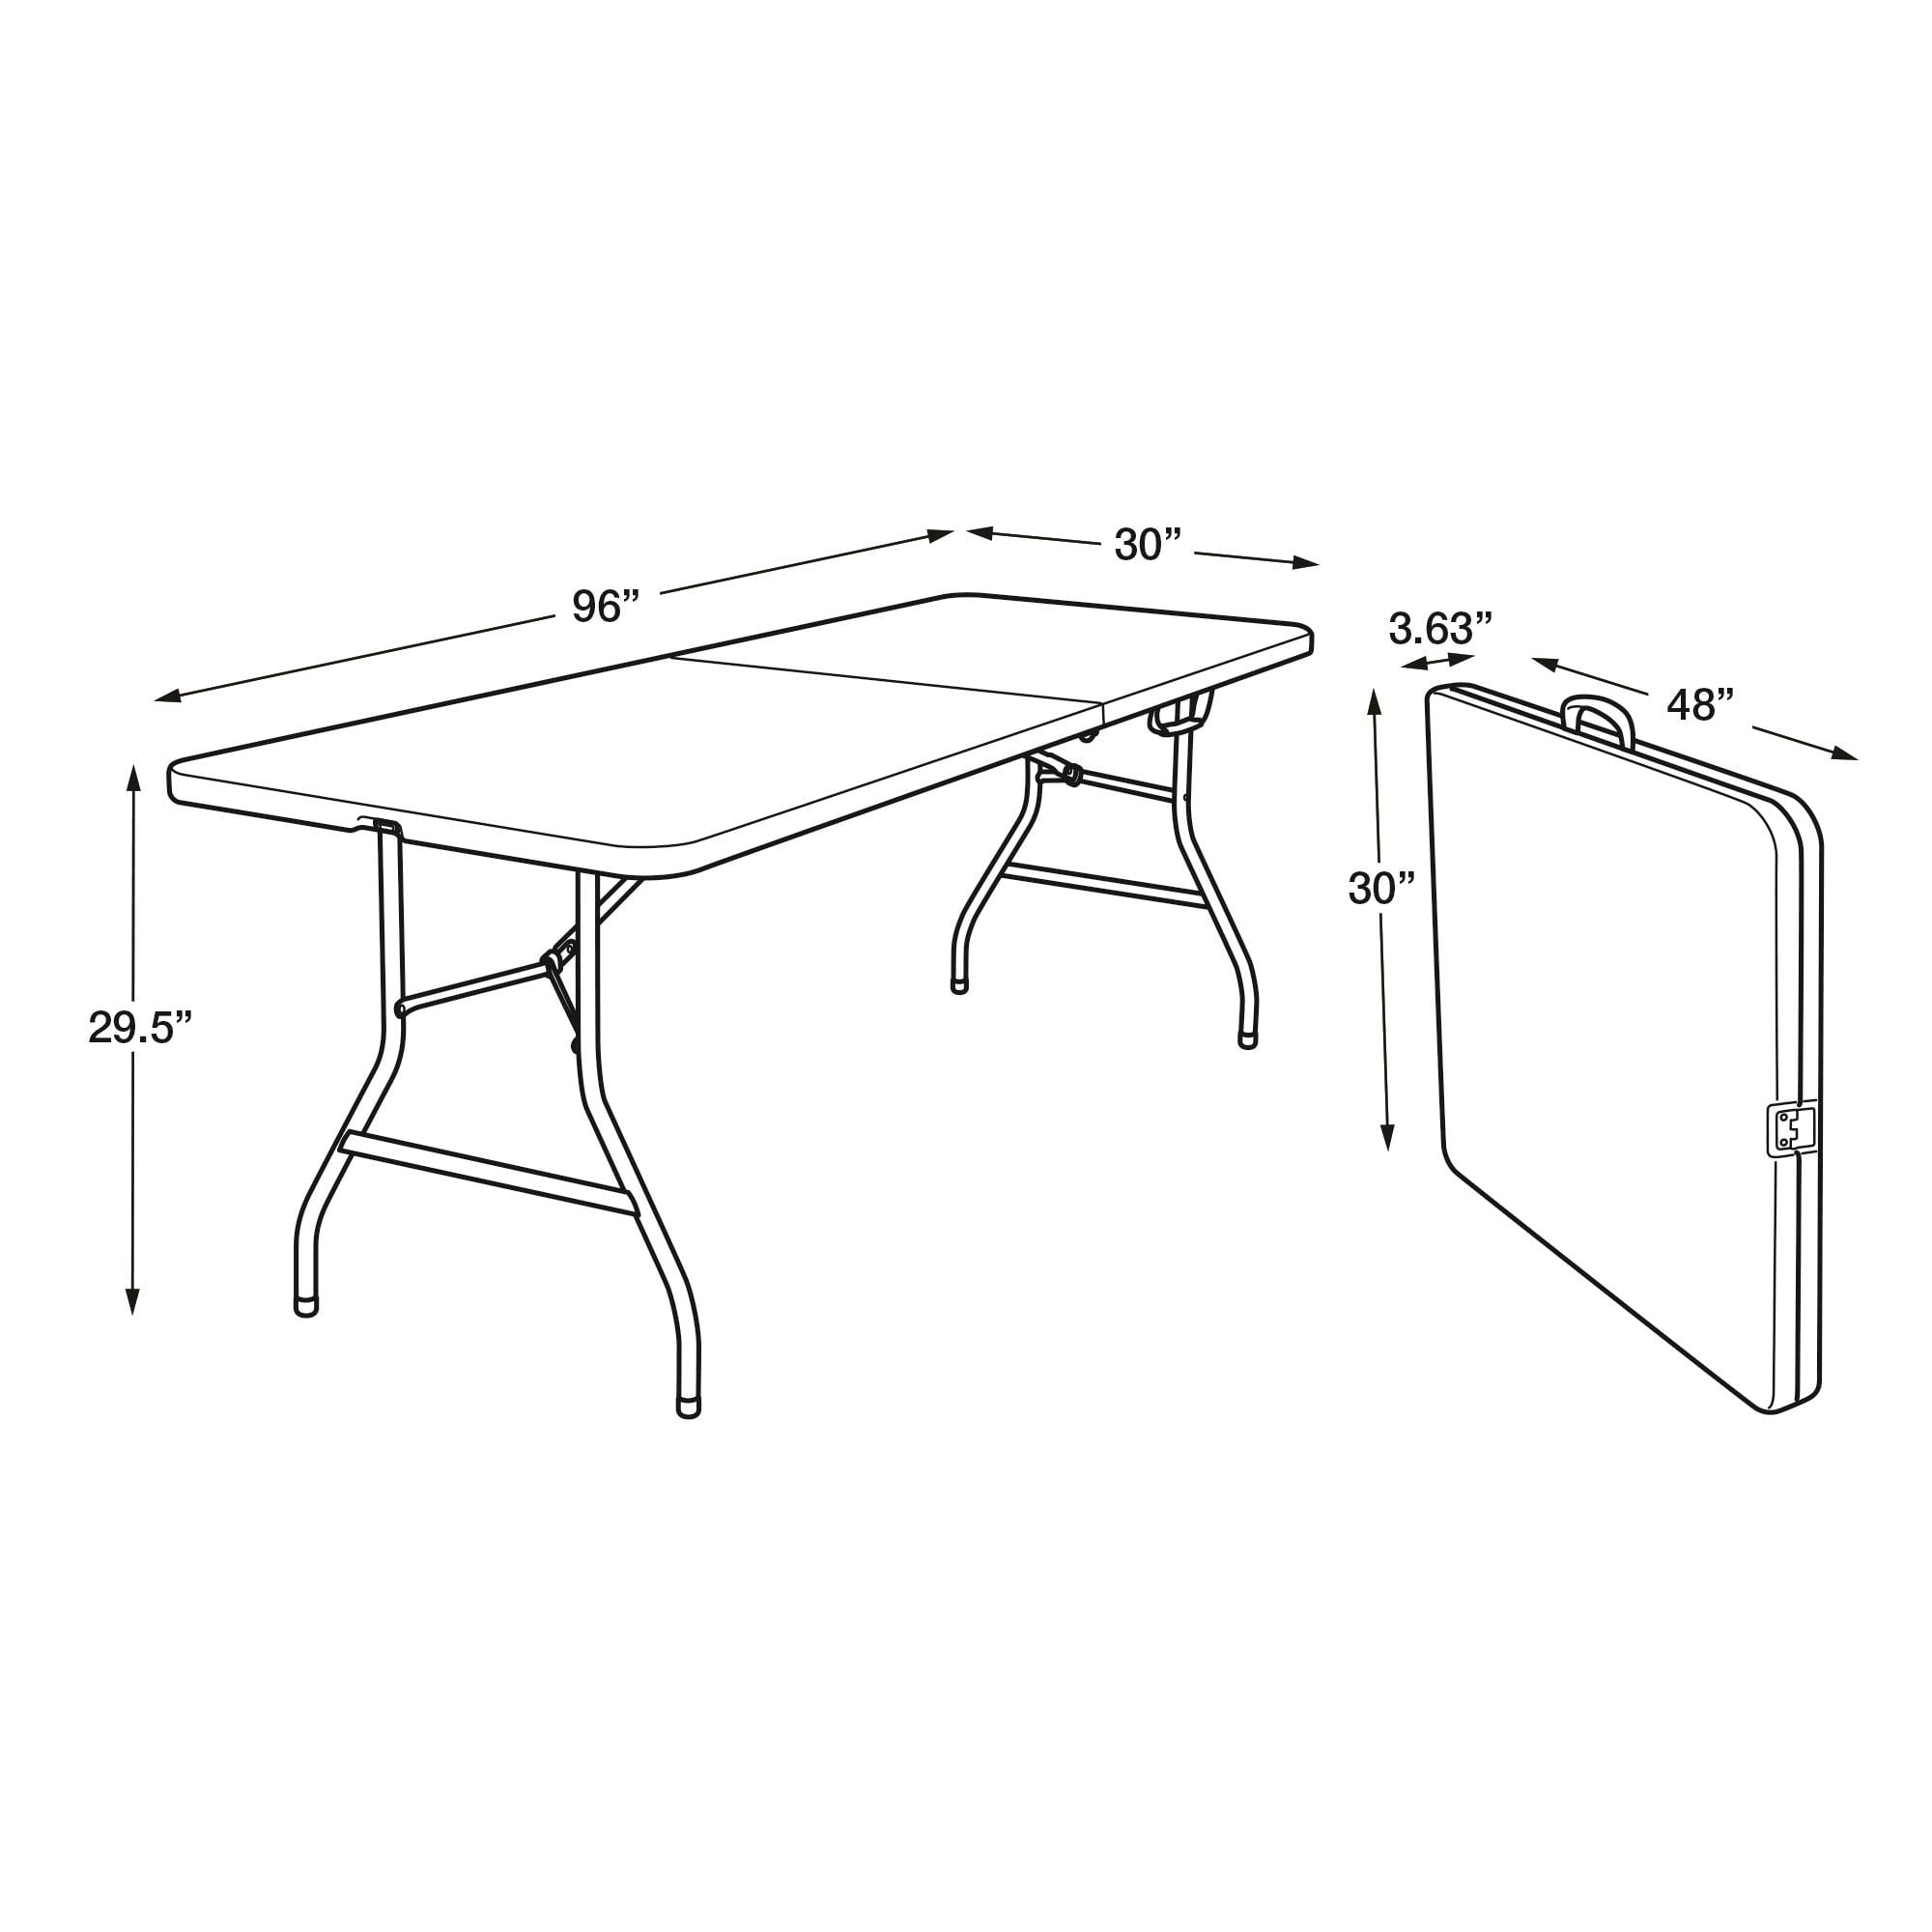 Details about   Cosco 8 Foot Centerfold Folding Table White 